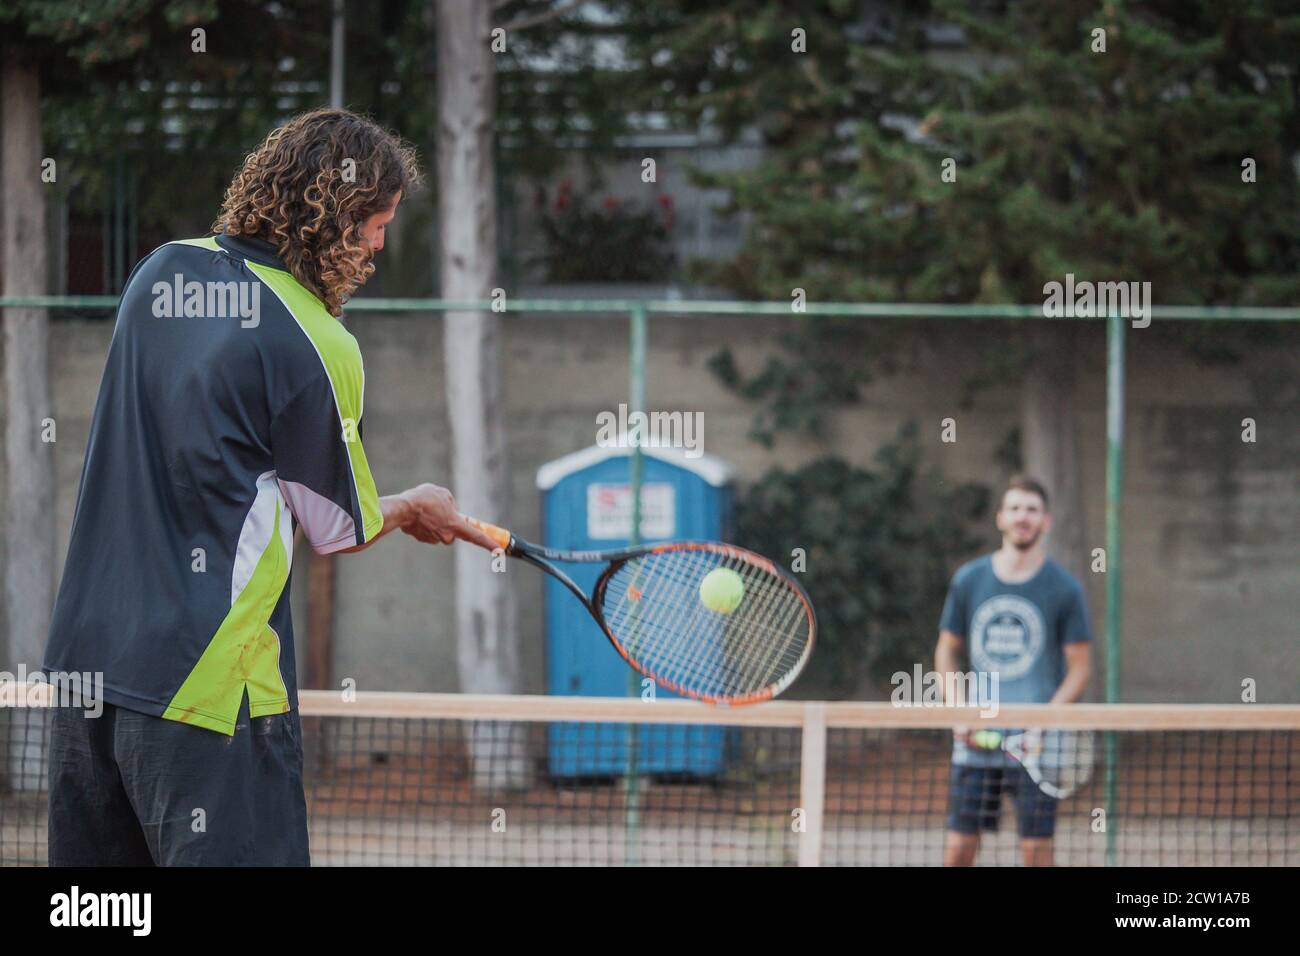 Man with longer hair seen from behind swining his racquet forehand to hit the ball, playing tennis outdoors with a friend. Ball seen blurred flying fa Stock Photo